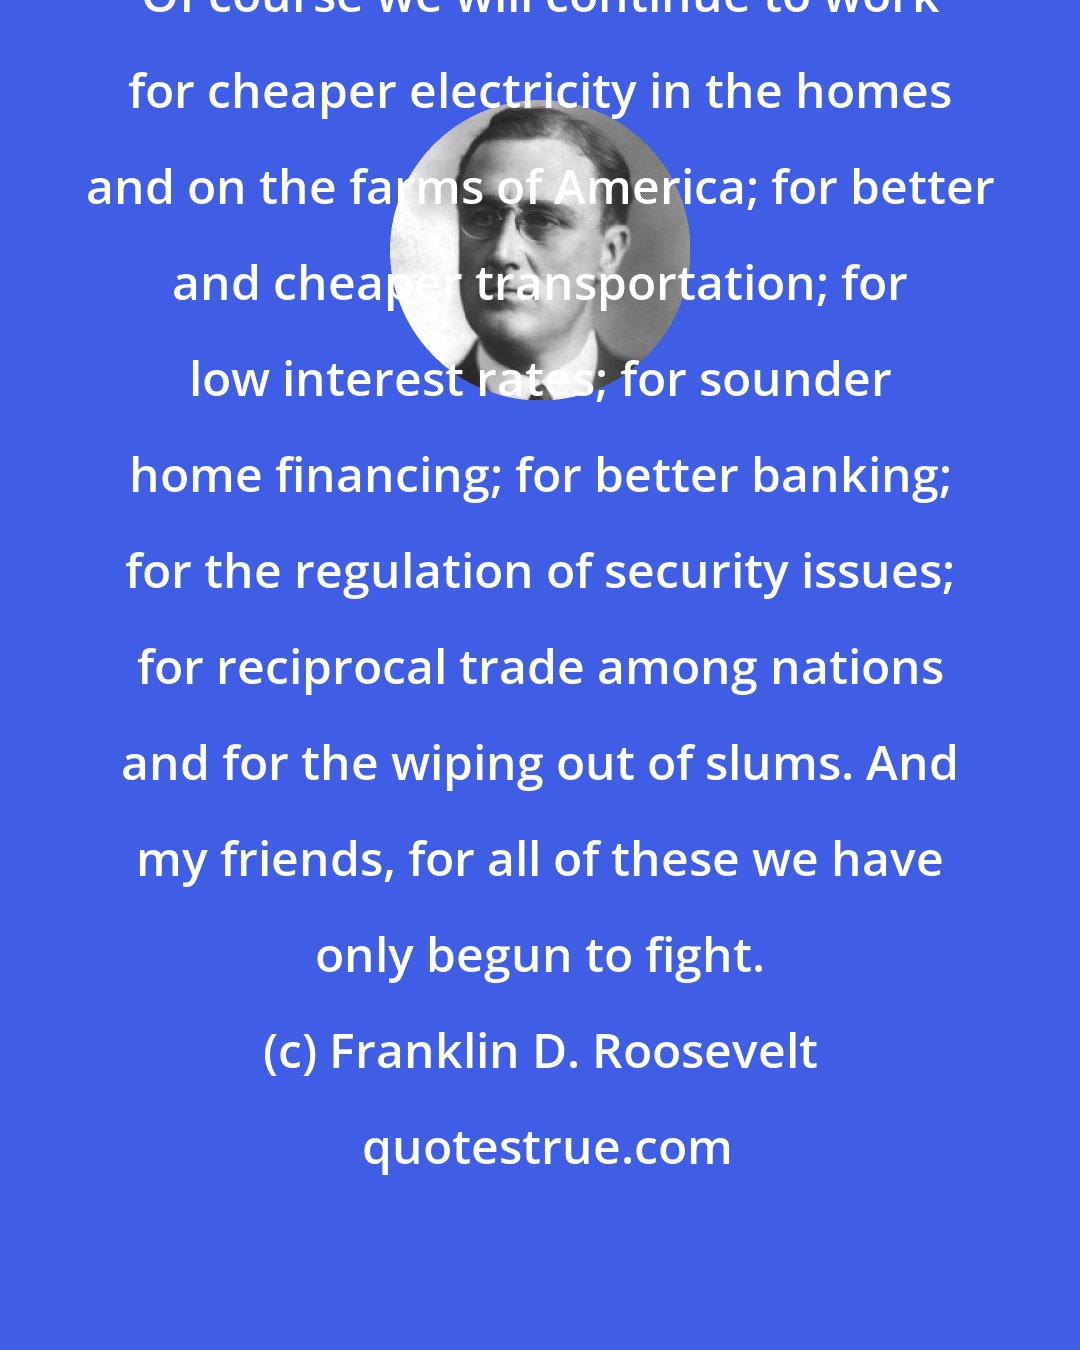 Franklin D. Roosevelt: Of course we will continue to work for cheaper electricity in the homes and on the farms of America; for better and cheaper transportation; for low interest rates; for sounder home financing; for better banking; for the regulation of security issues; for reciprocal trade among nations and for the wiping out of slums. And my friends, for all of these we have only begun to fight.